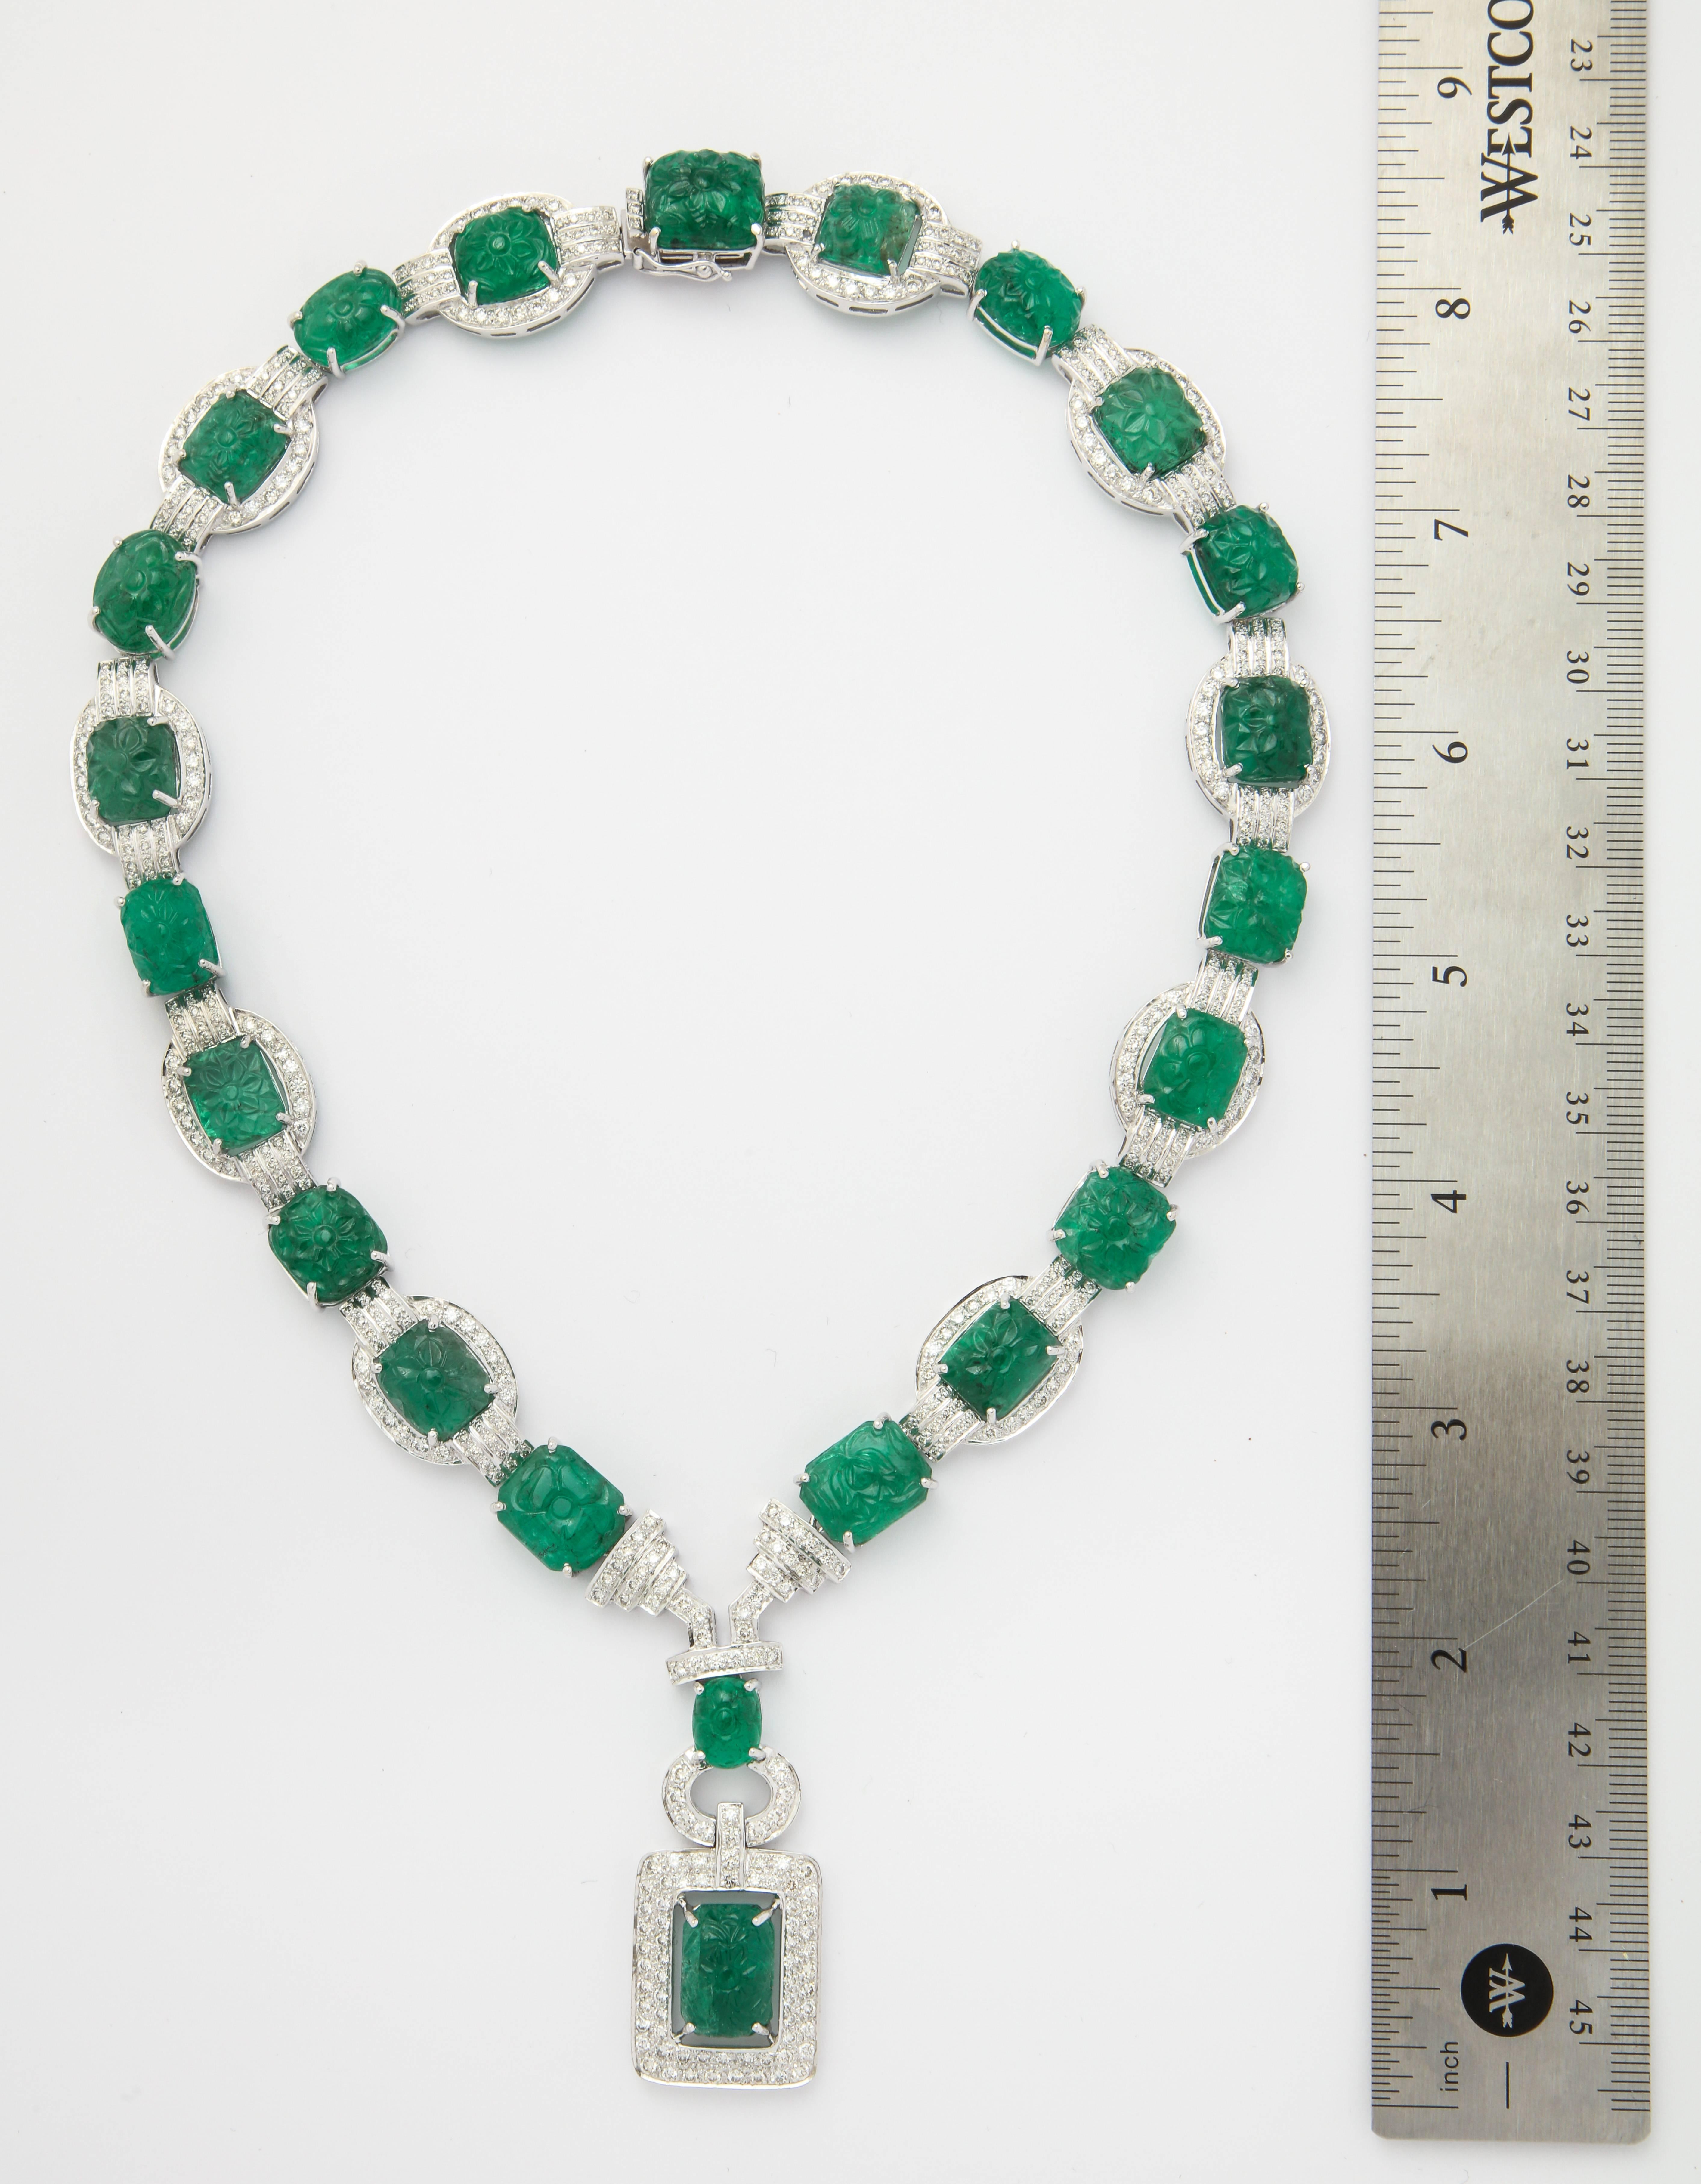 A very rare collection of matching carved emeralds set in a beautiful diamond necklace.

